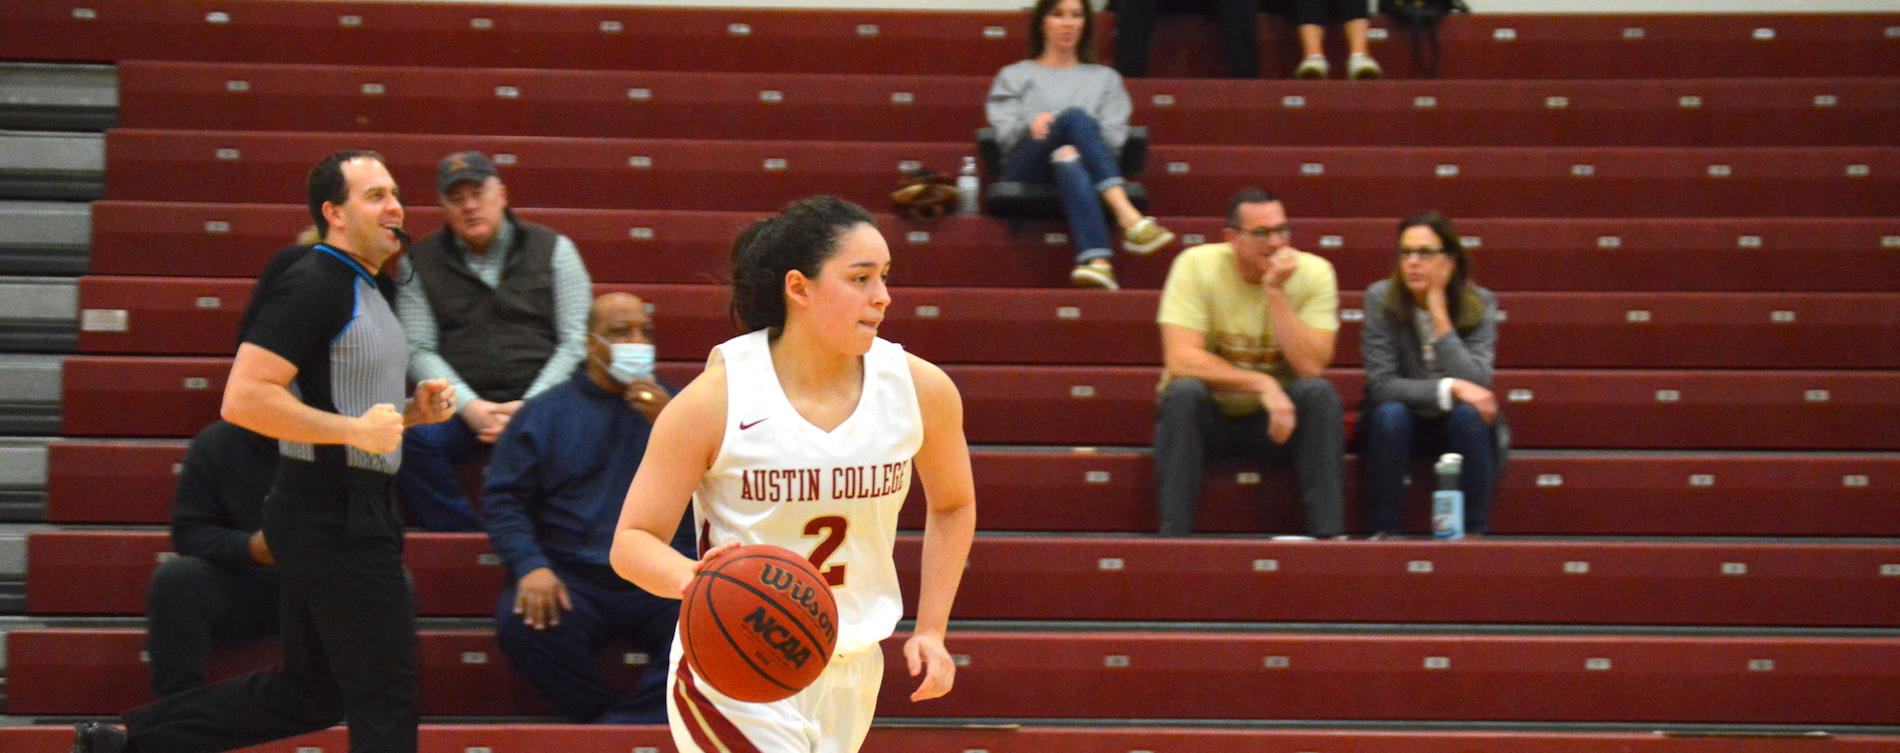 McCoy Named SCAC Woman of the Year Finalist